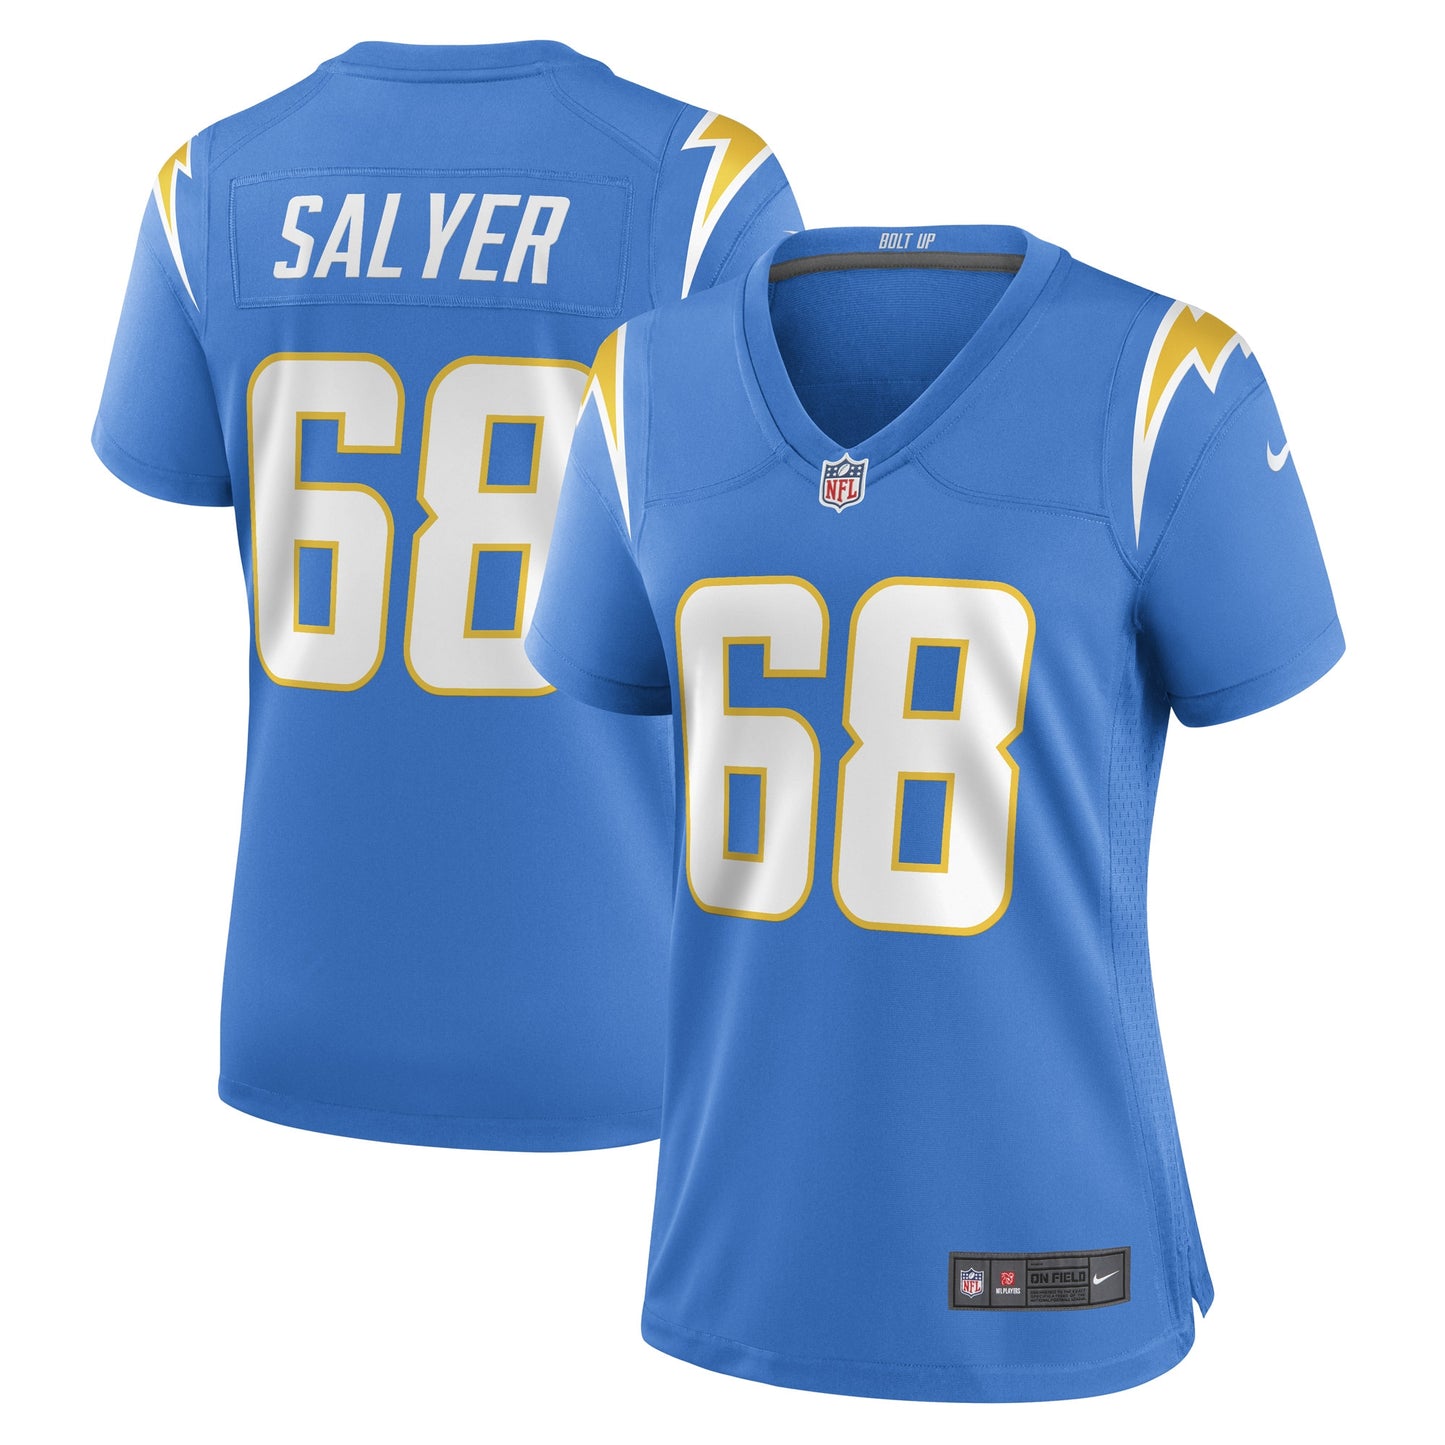 Jamaree Salyer Los Angeles Chargers Nike Women's Game Player Jersey - Powder Blue